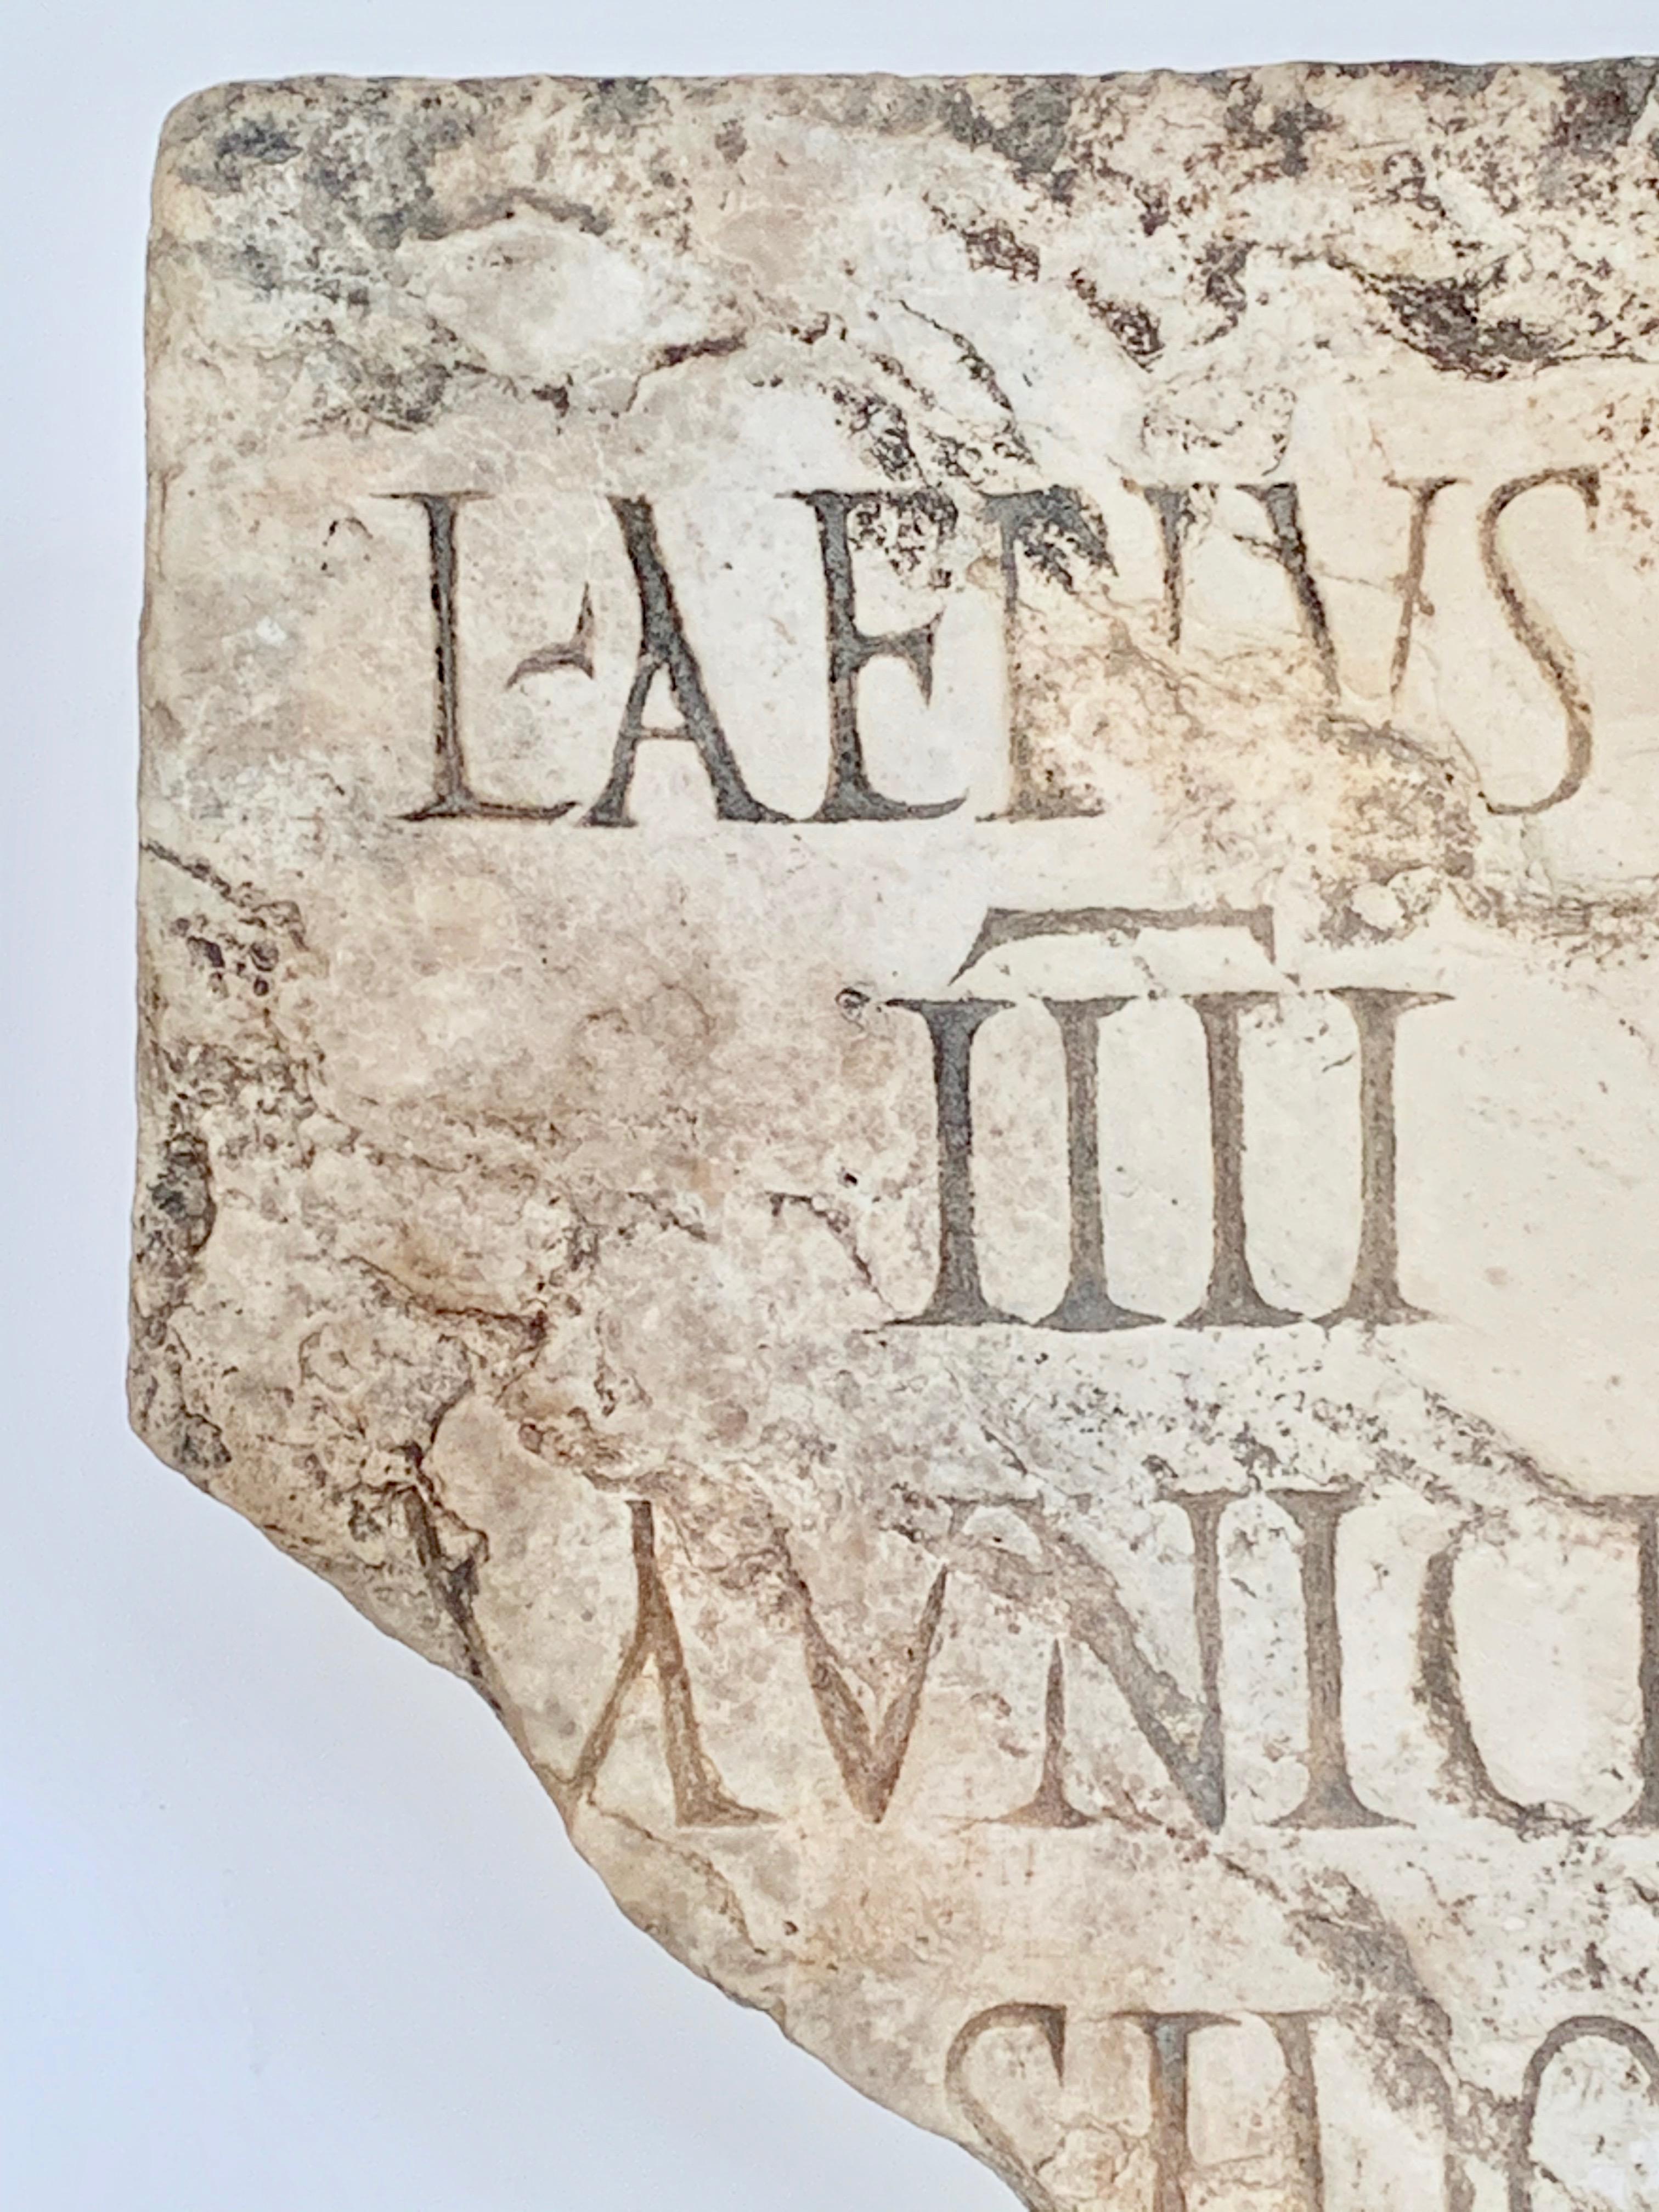 Roman Antiquities stone sculpture fragment
Rare latin text fragment
2nd century, Spain
Provenance: Private Collector
